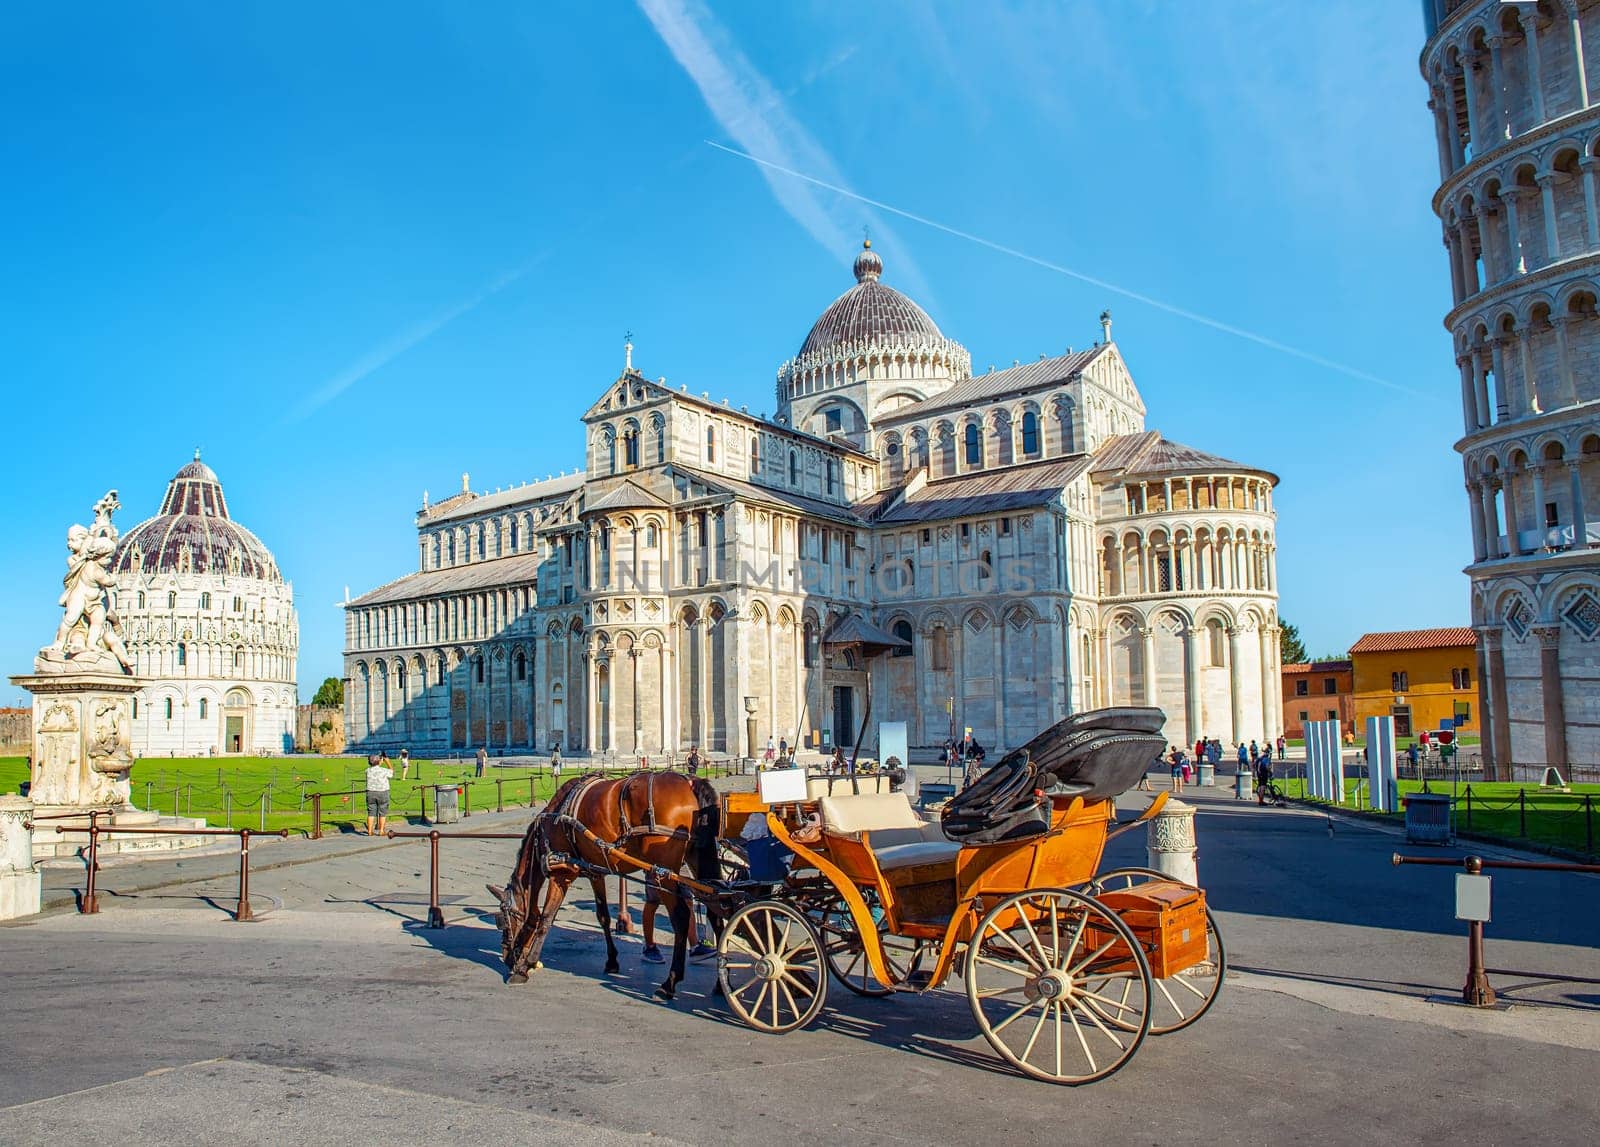 Carriage with horse in front of the leaning tower of Pisa